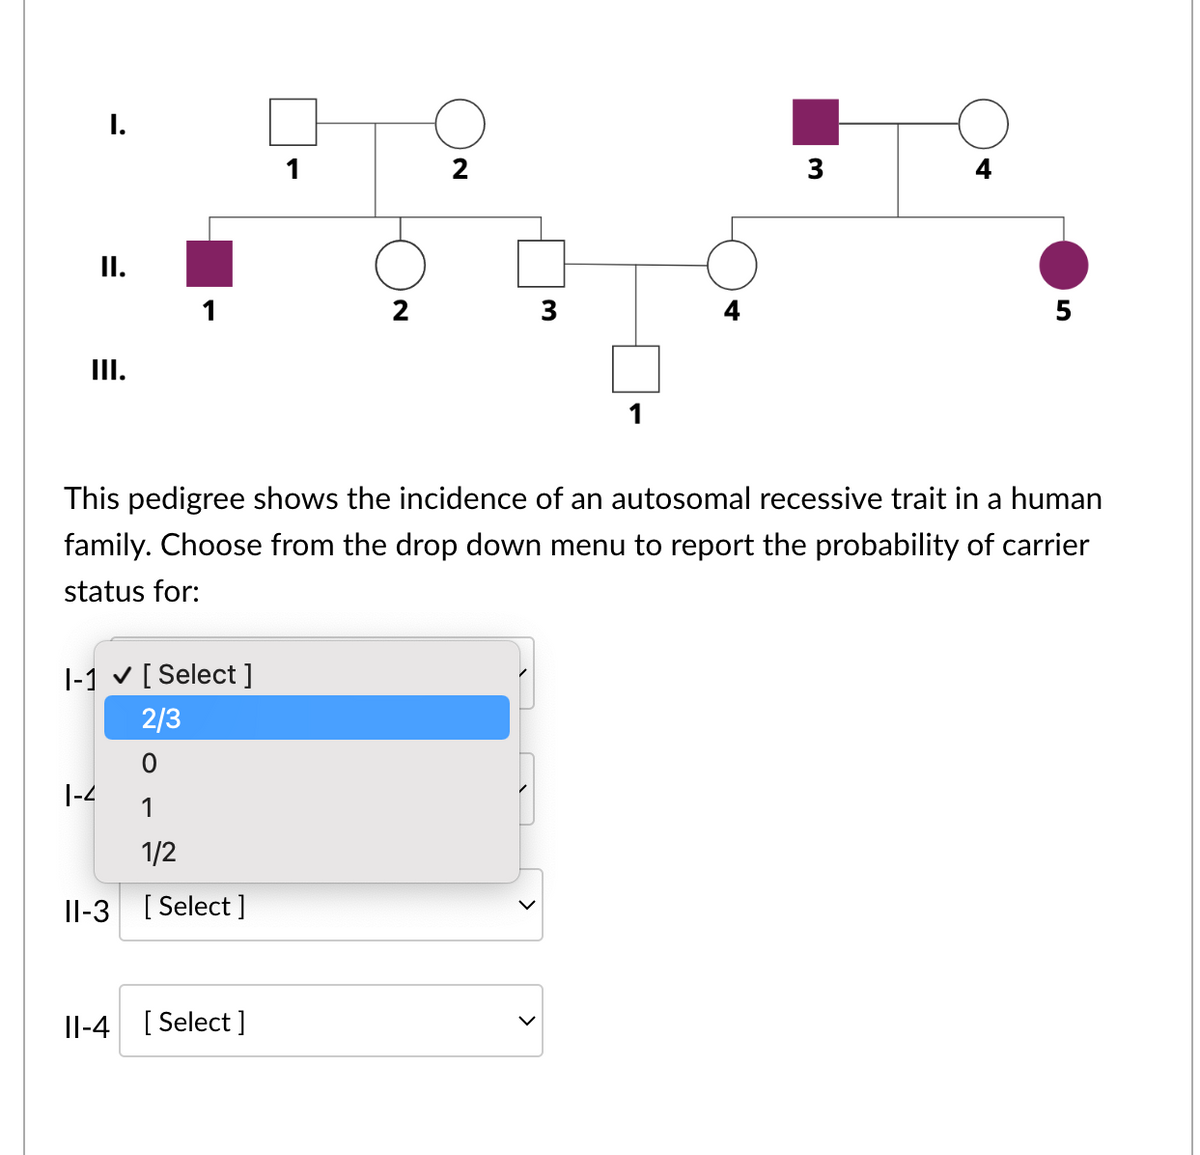 II.
III.
1-1 ✓ [Select ]
2/3
0
1
1/2
11-3 [Select]
1-4
1
11-4 [Select]
2
2
3
This pedigree shows the incidence of an autosomal recessive trait in a human
family. Choose from the drop down menu to report the probability of carrier
status for:
>
3
4
5